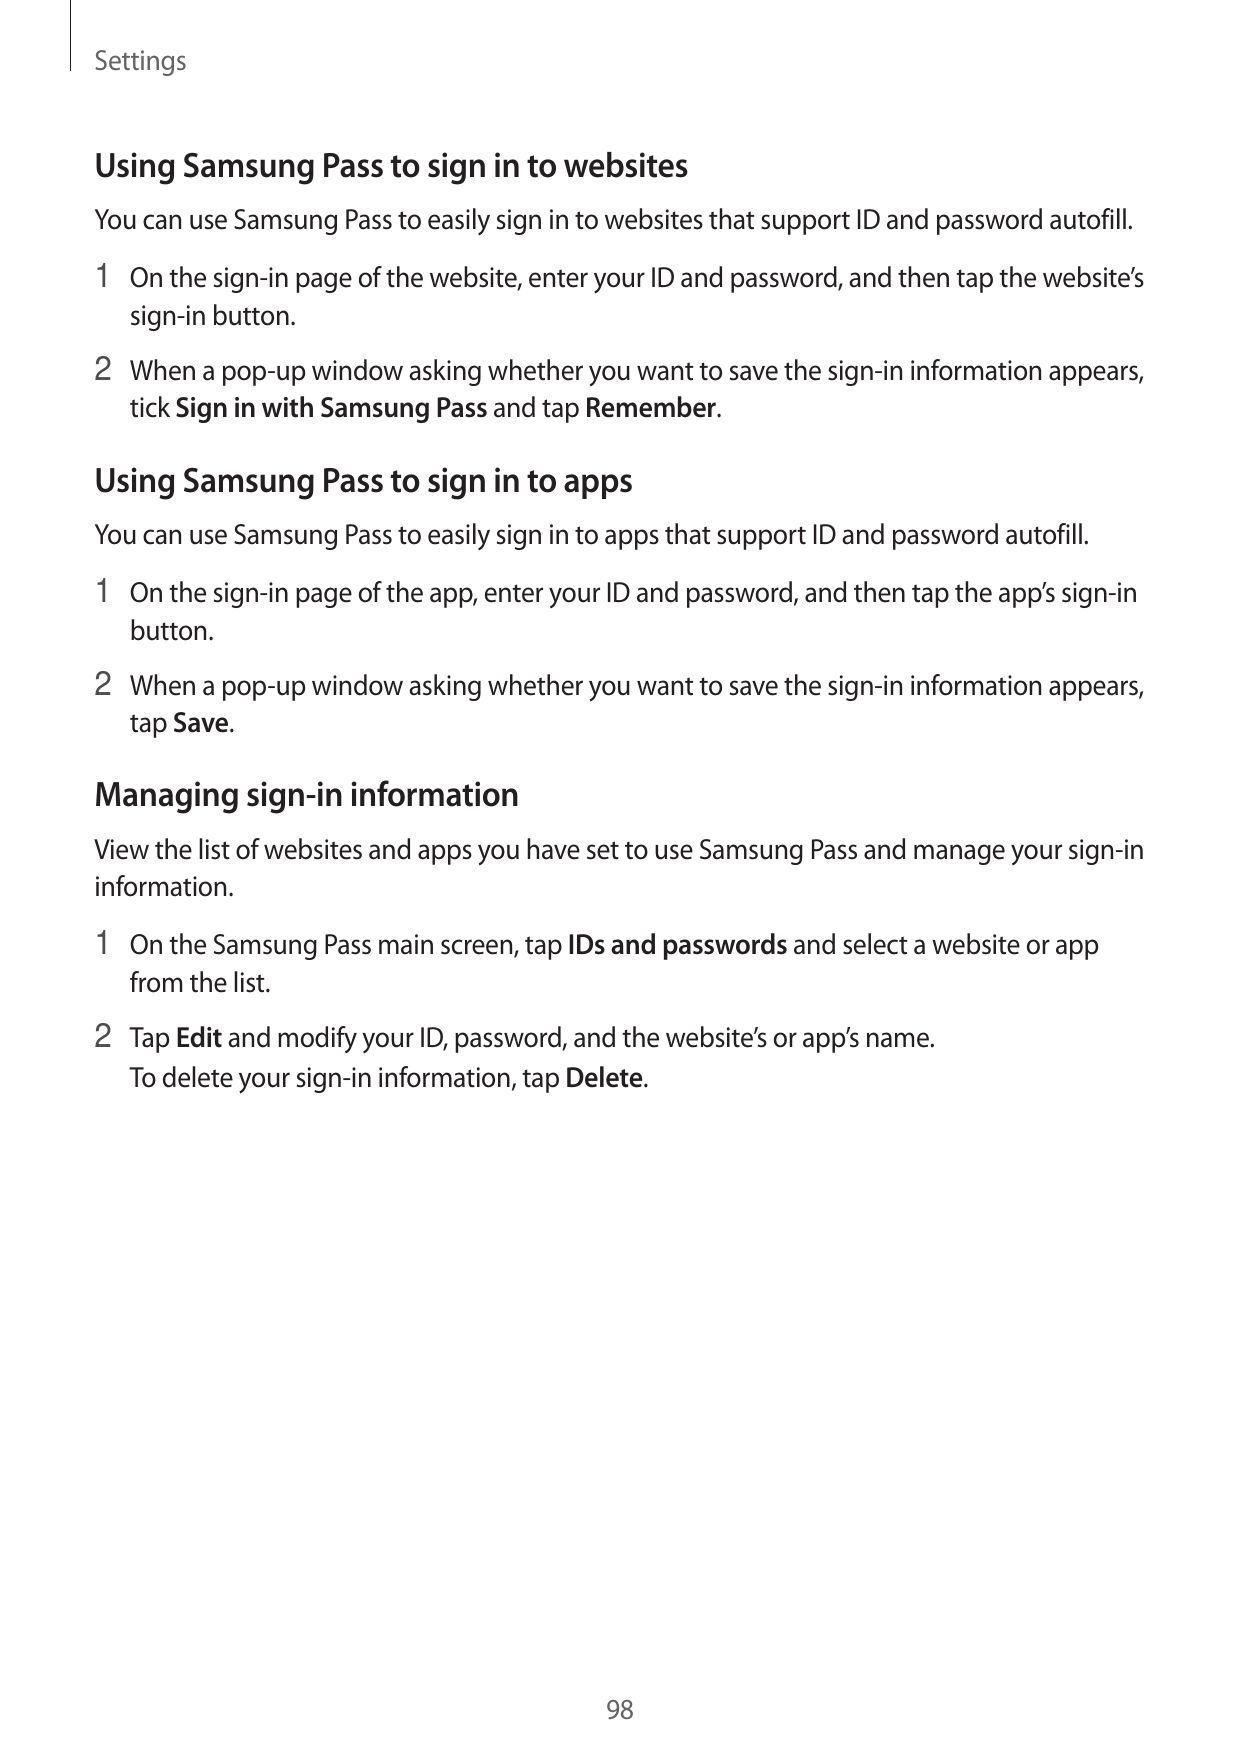 SettingsUsing Samsung Pass to sign in to websitesYou can use Samsung Pass to easily sign in to websites that support ID and pass